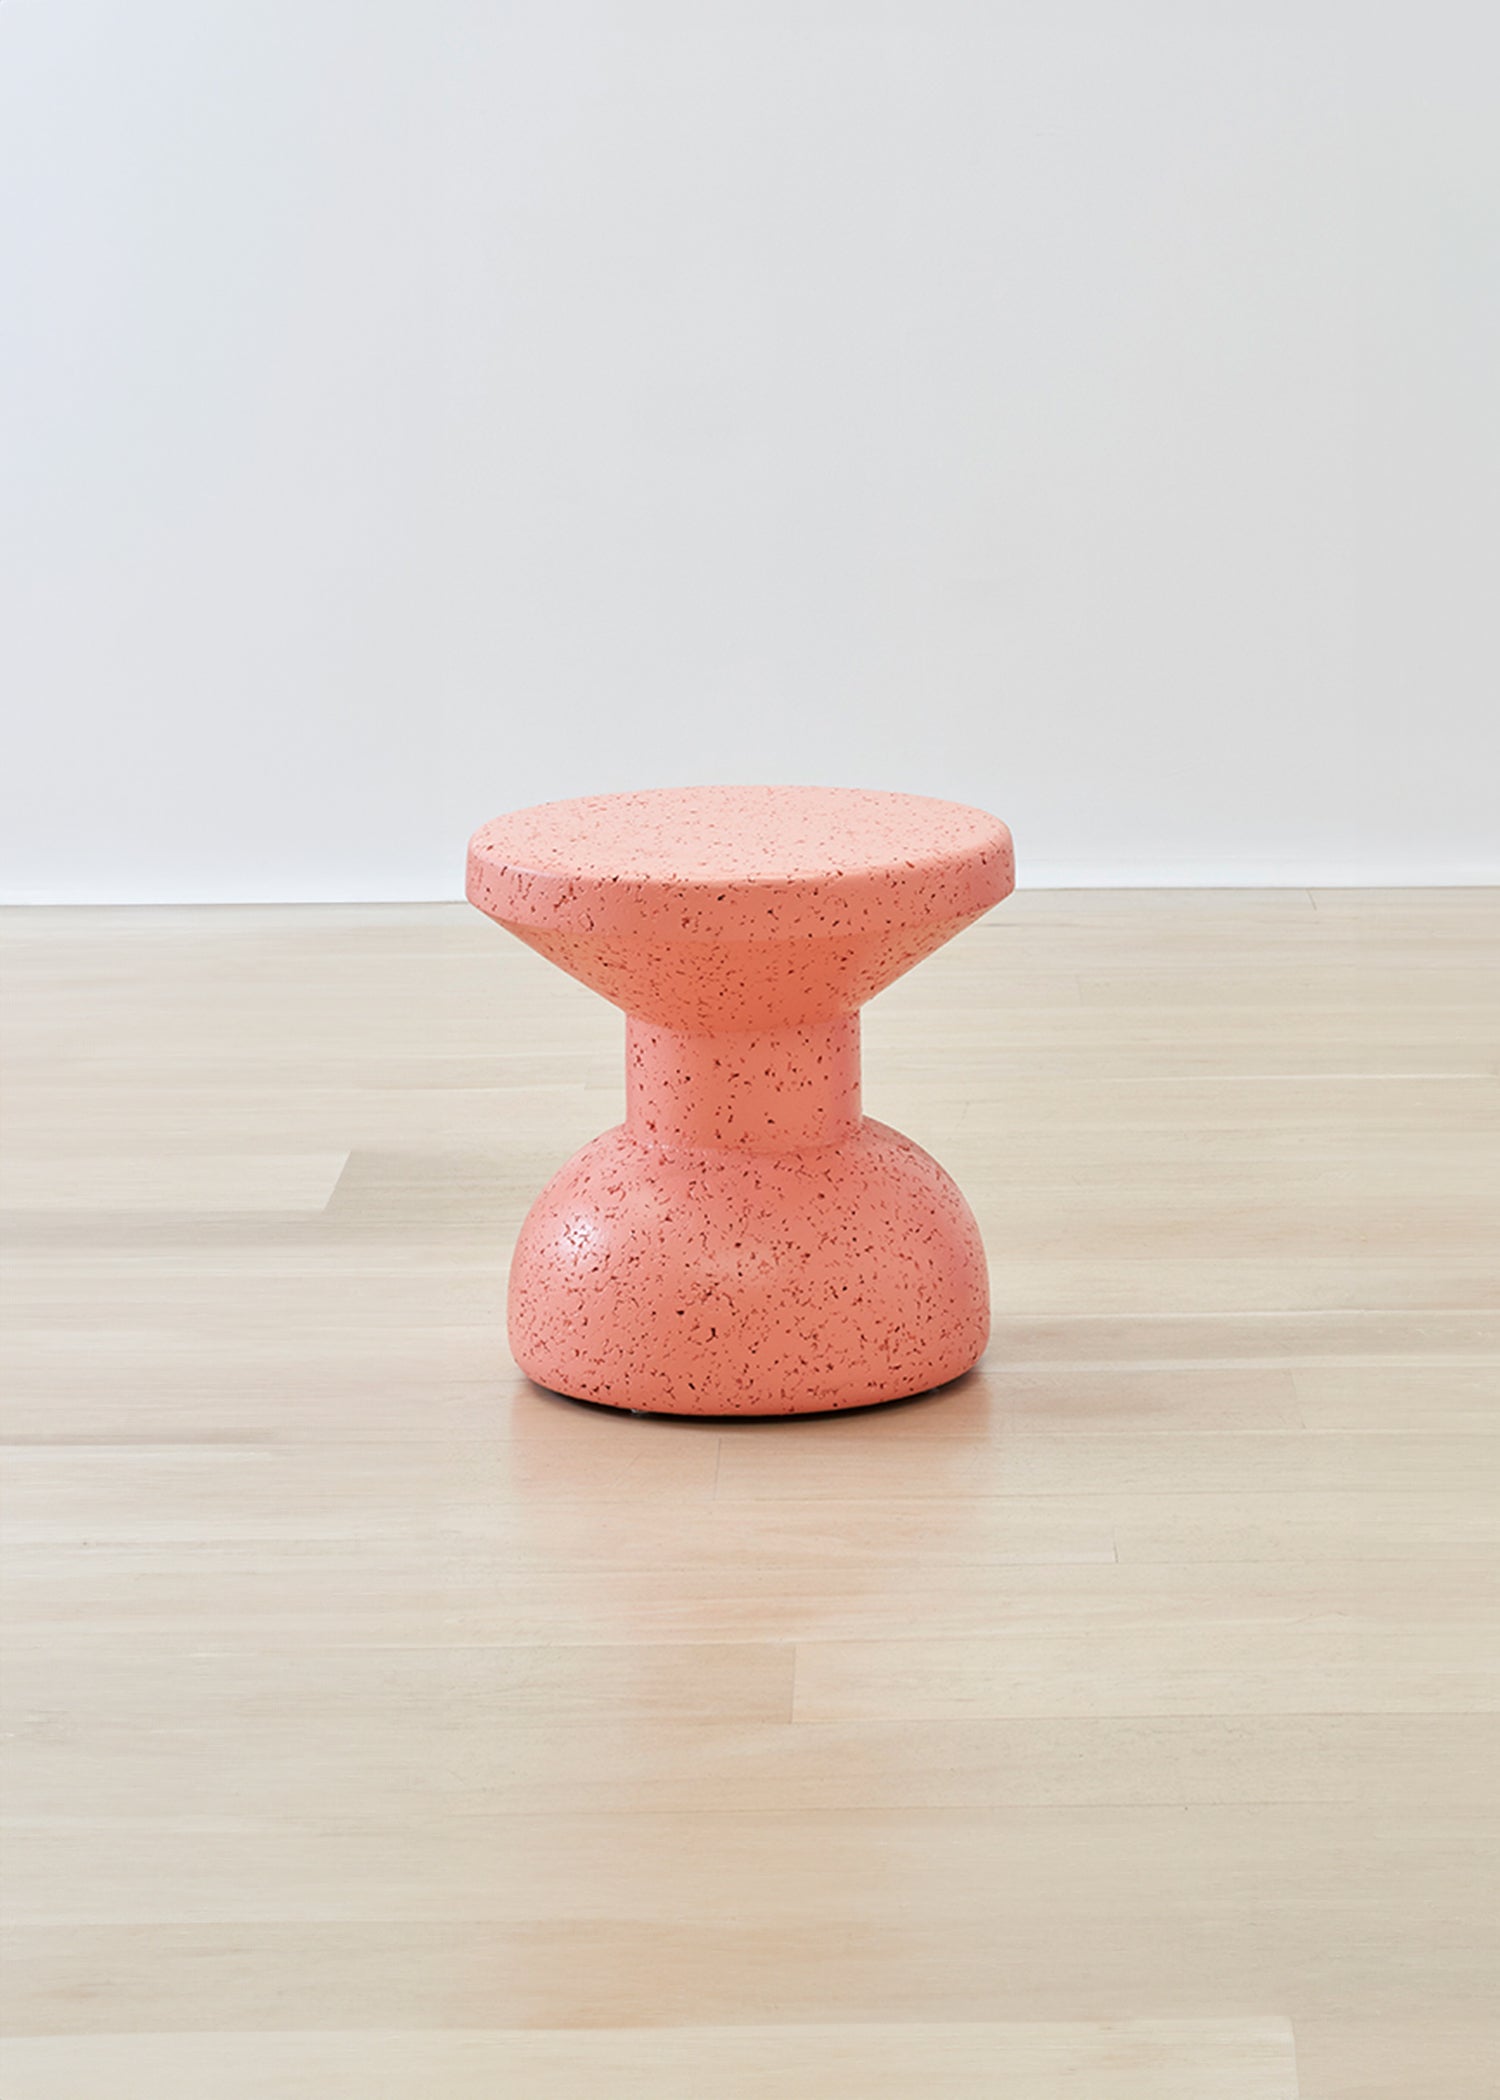 Striking Kanju Wiid Painted African Slim Cork Stool in a vibrant coral hue, blending sleek design with eco-friendly innovation. This slim stool's bold color and refined silhouette offer a modern twist on traditional craftsmanship, ideal for interiors seeking a splash of color and sustainable elegance.